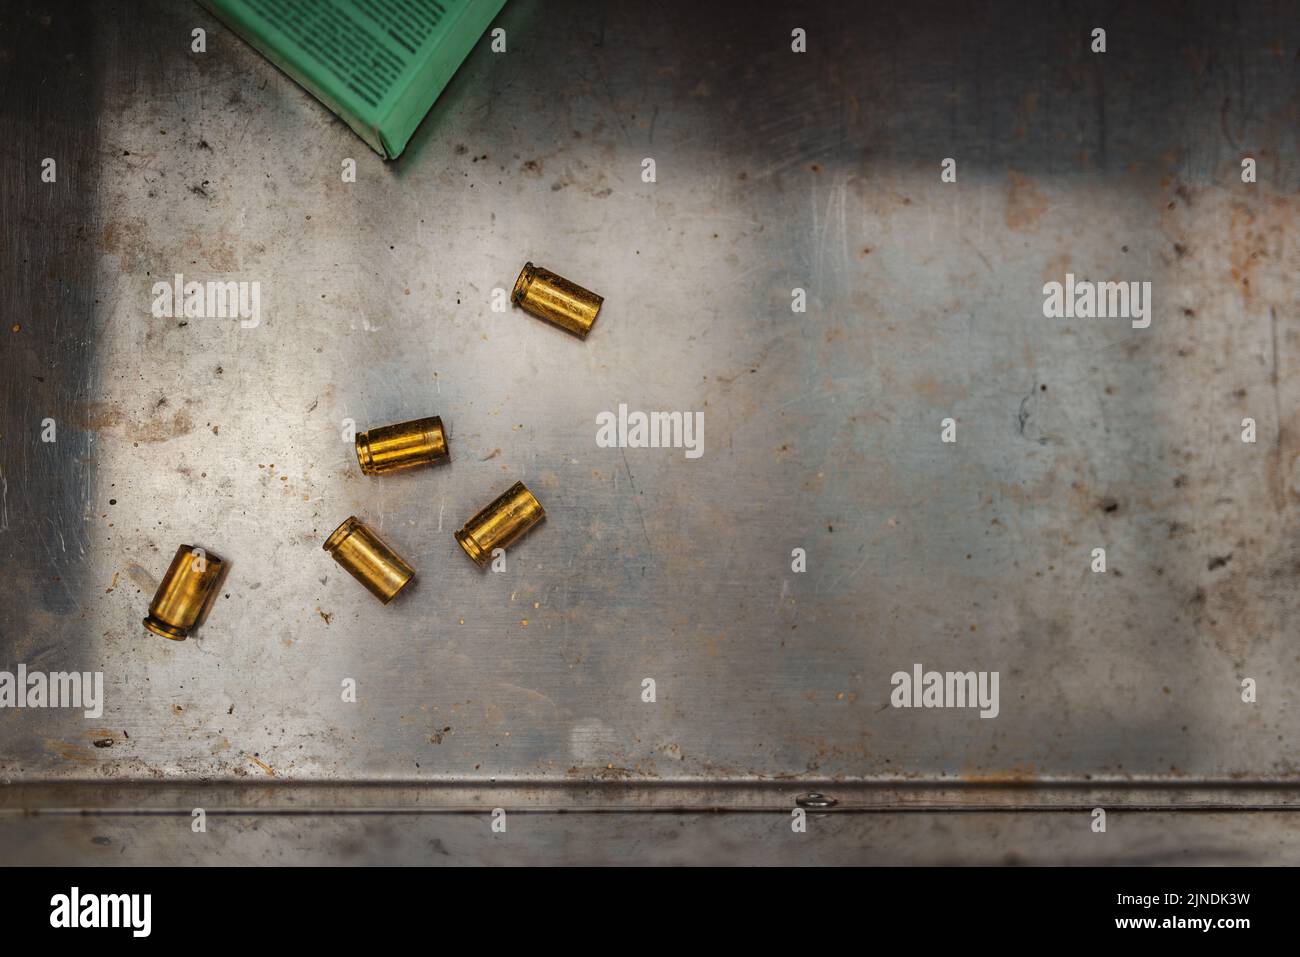 Flat lay view of lying fired bullet casings. Stock Photo